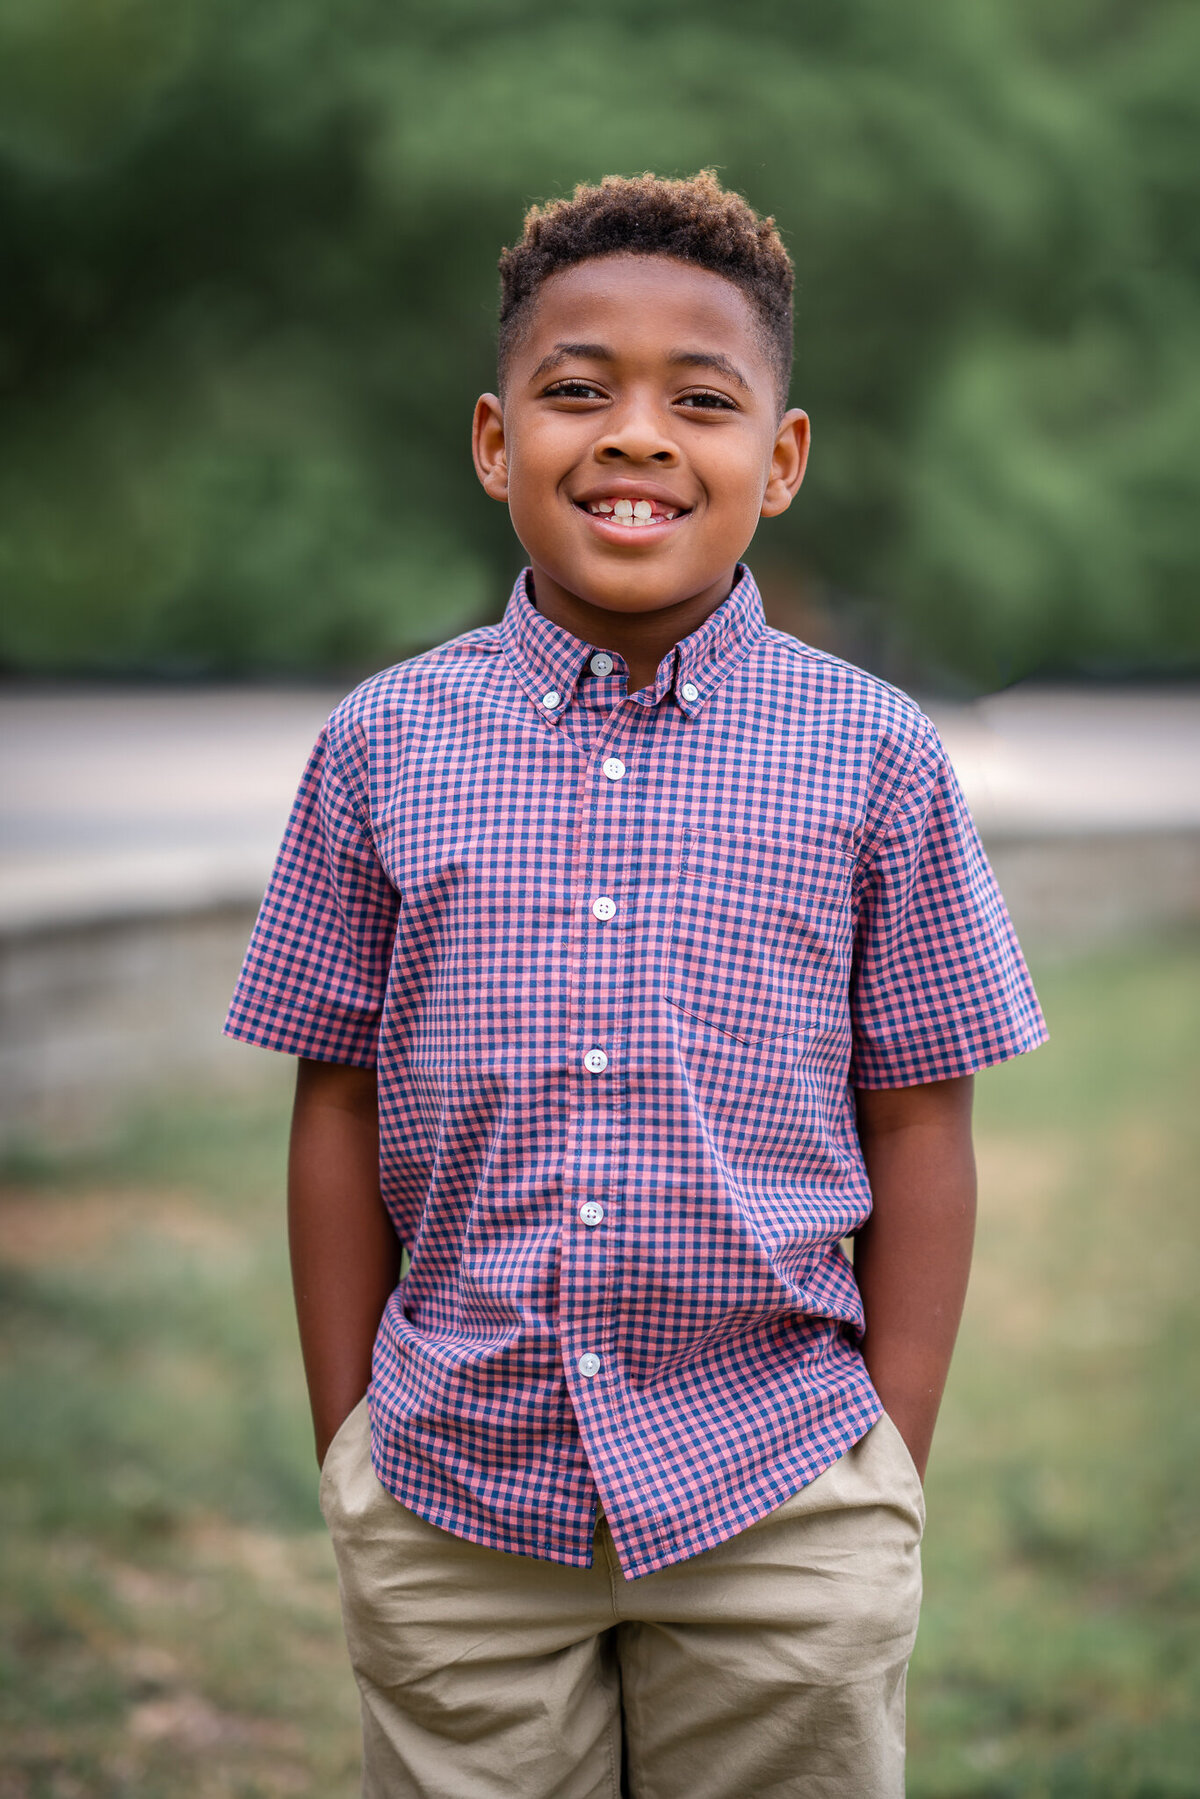 A young boy wearing a plaid button down shirt has his hands in his pocket and is smiling.